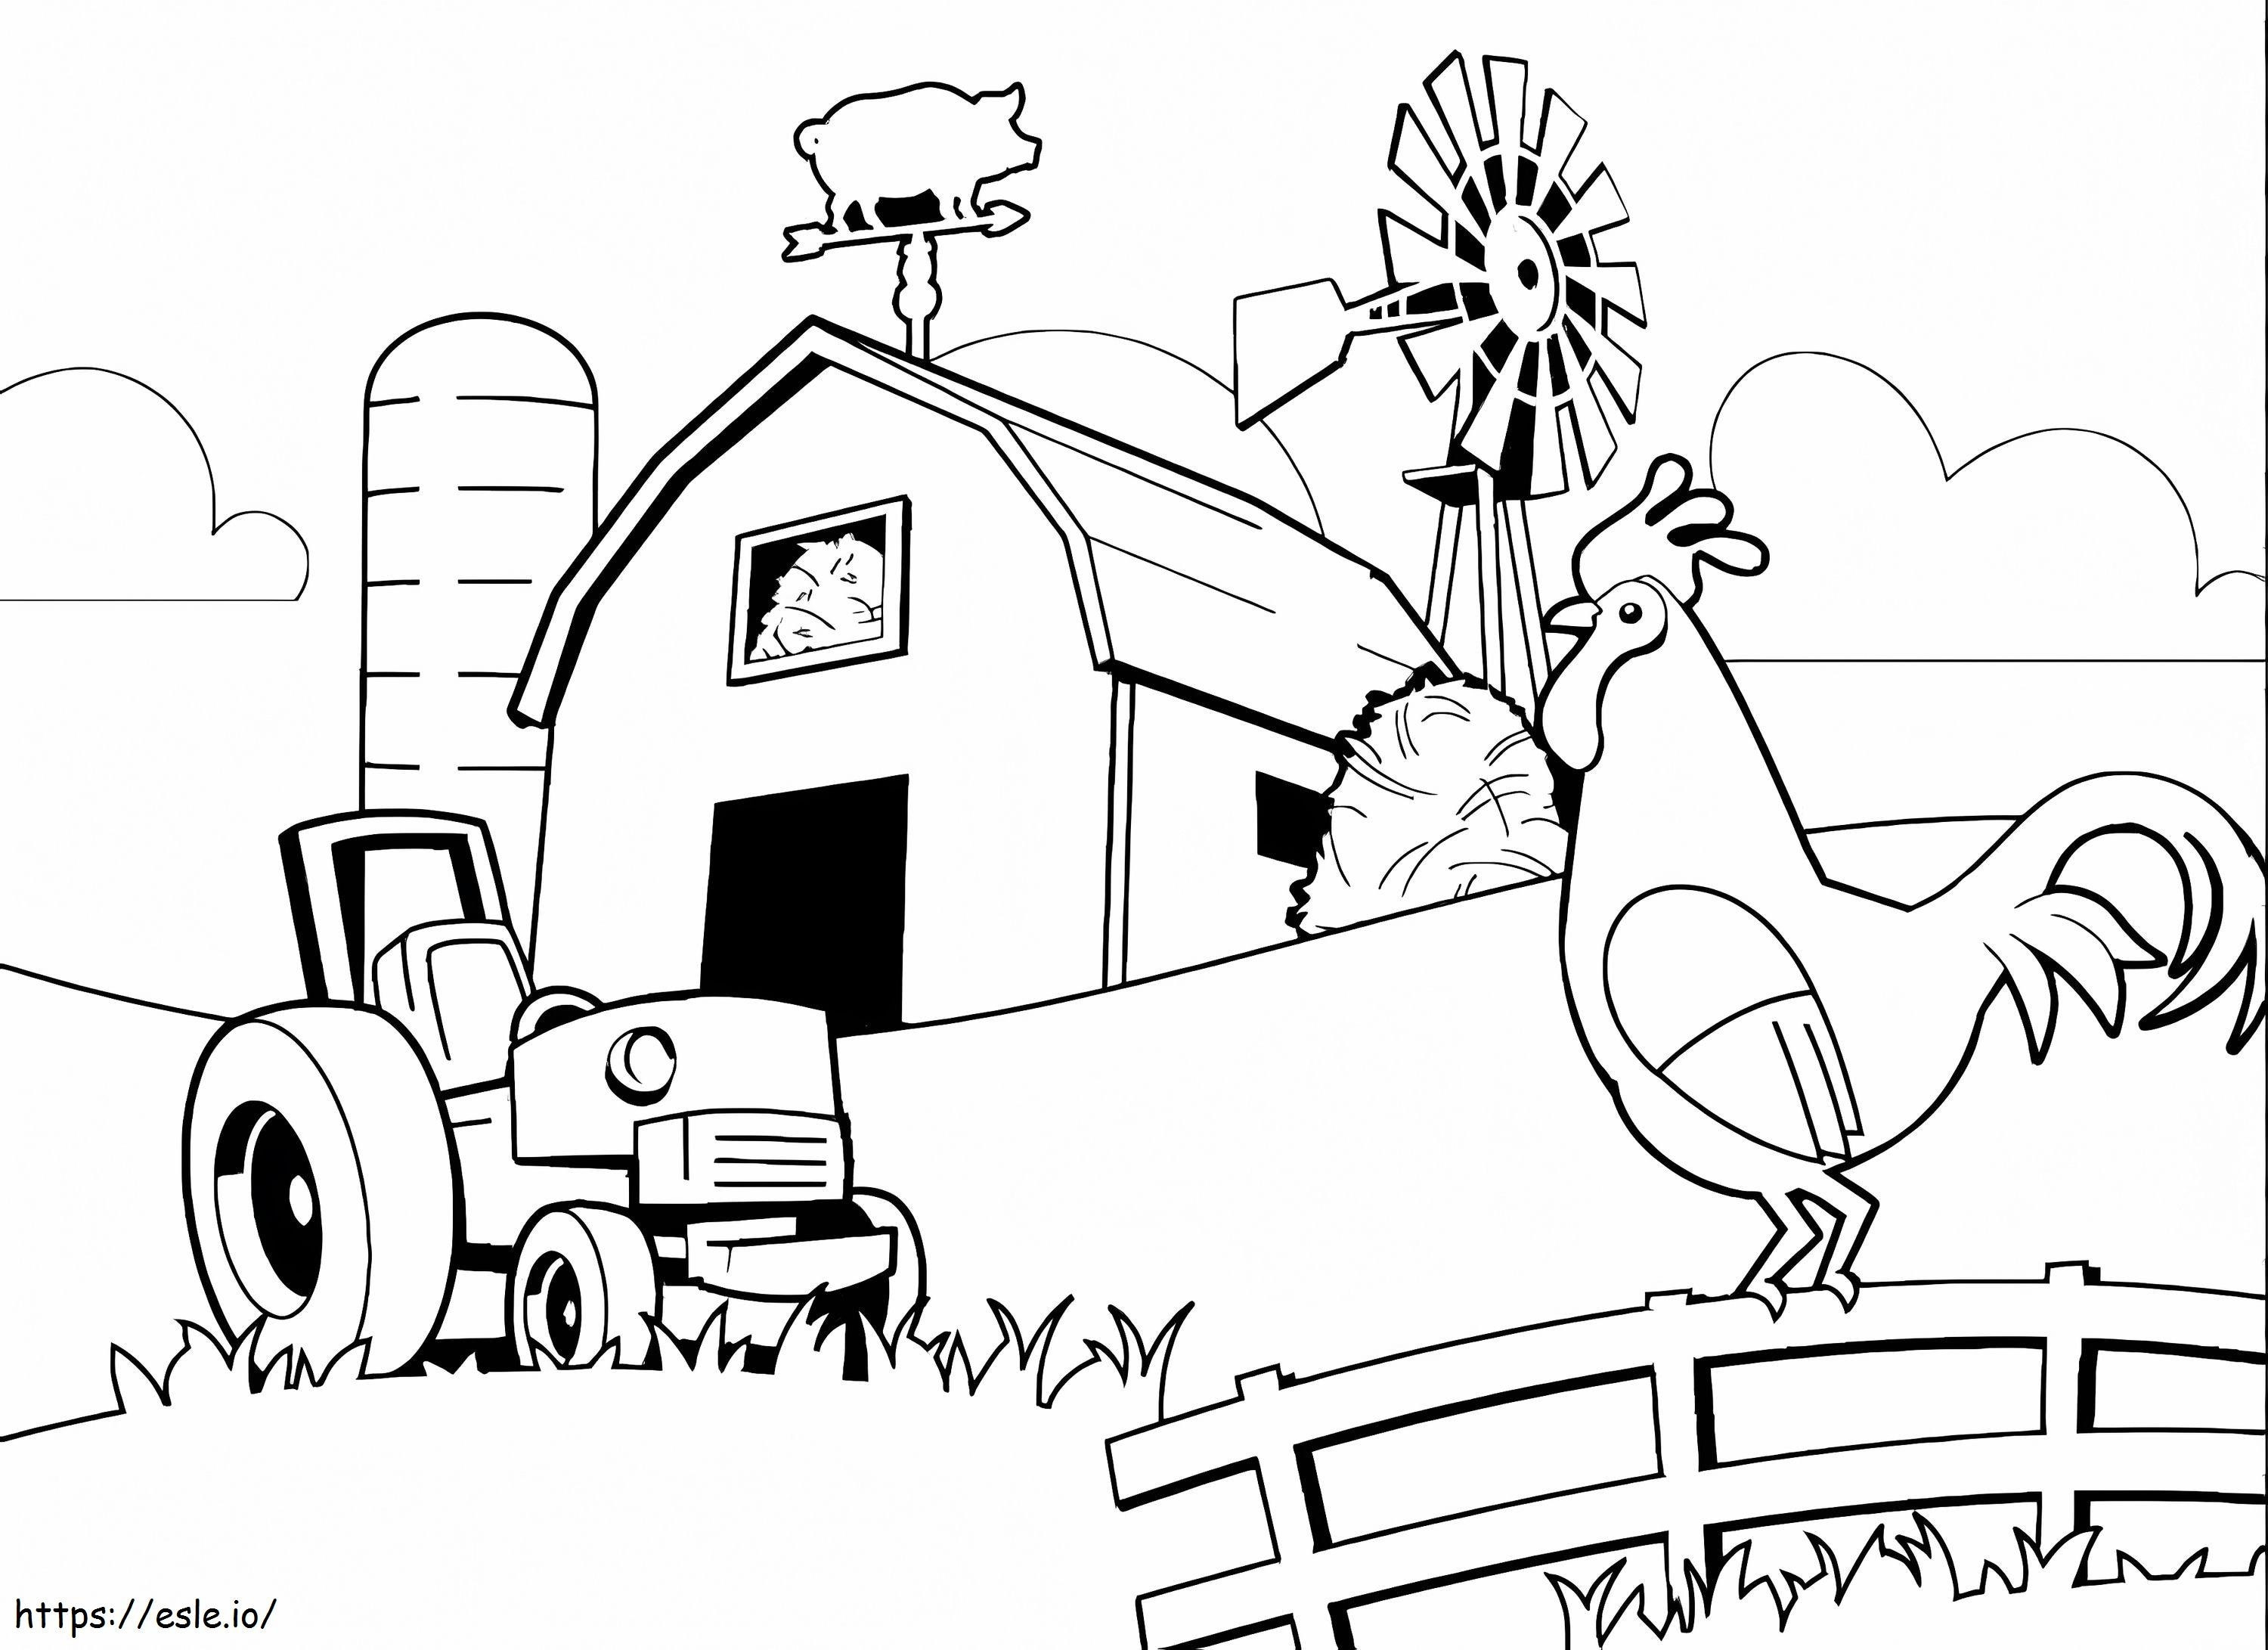 Chicken Pen coloring page